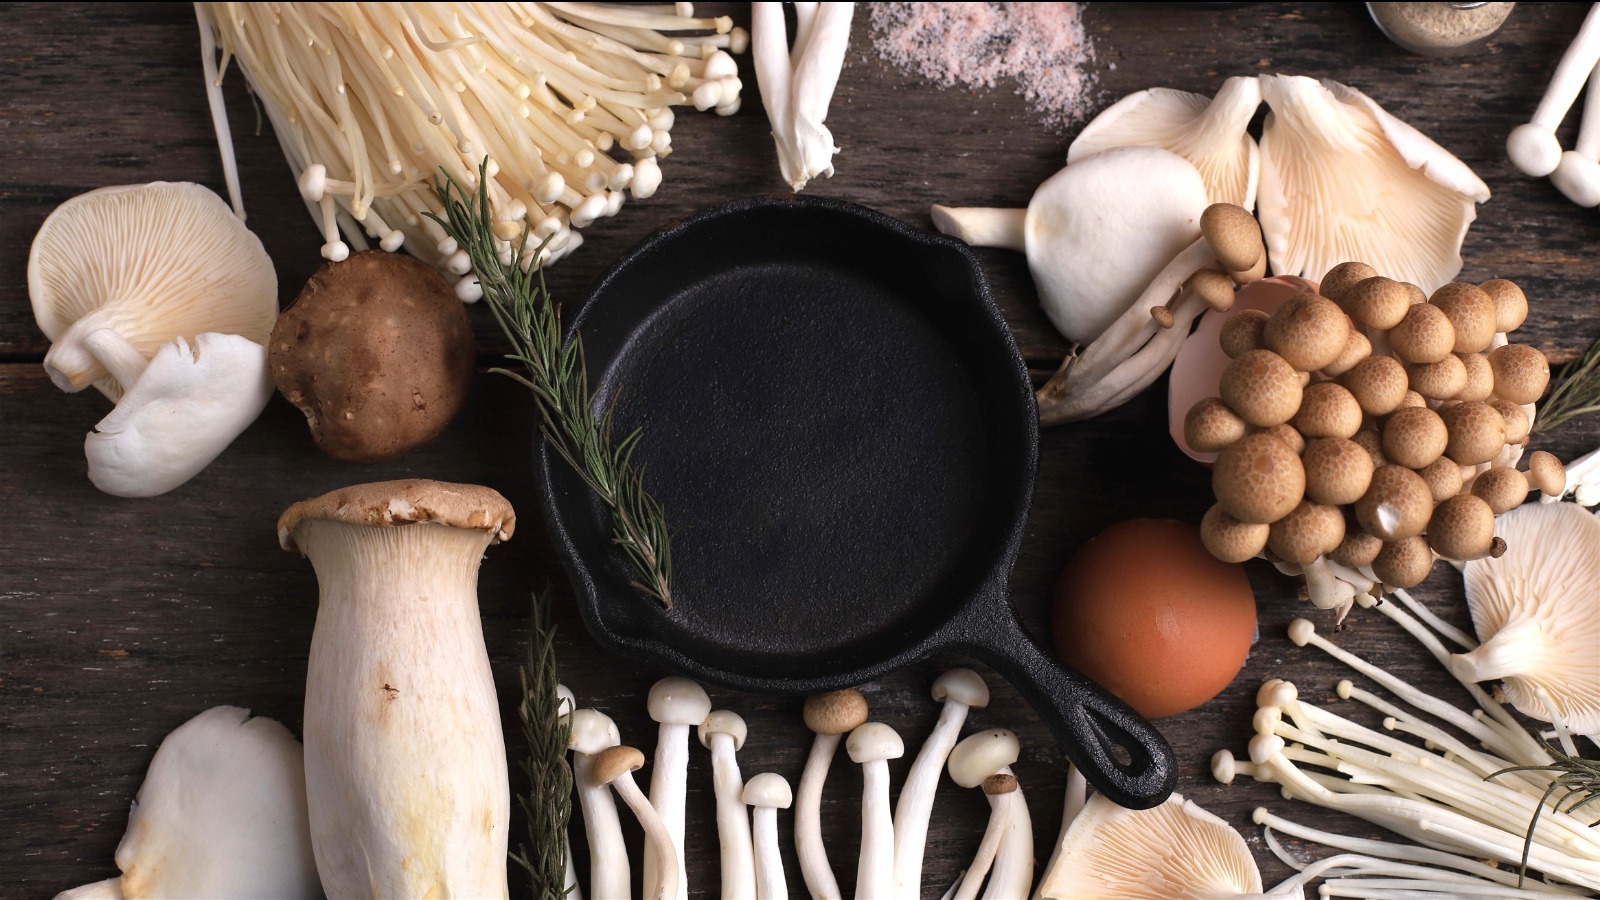 https://www.tastingtable.com/img/gallery/20-tips-you-need-when-cooking-with-mushrooms/l-intro-1673458855.jpg